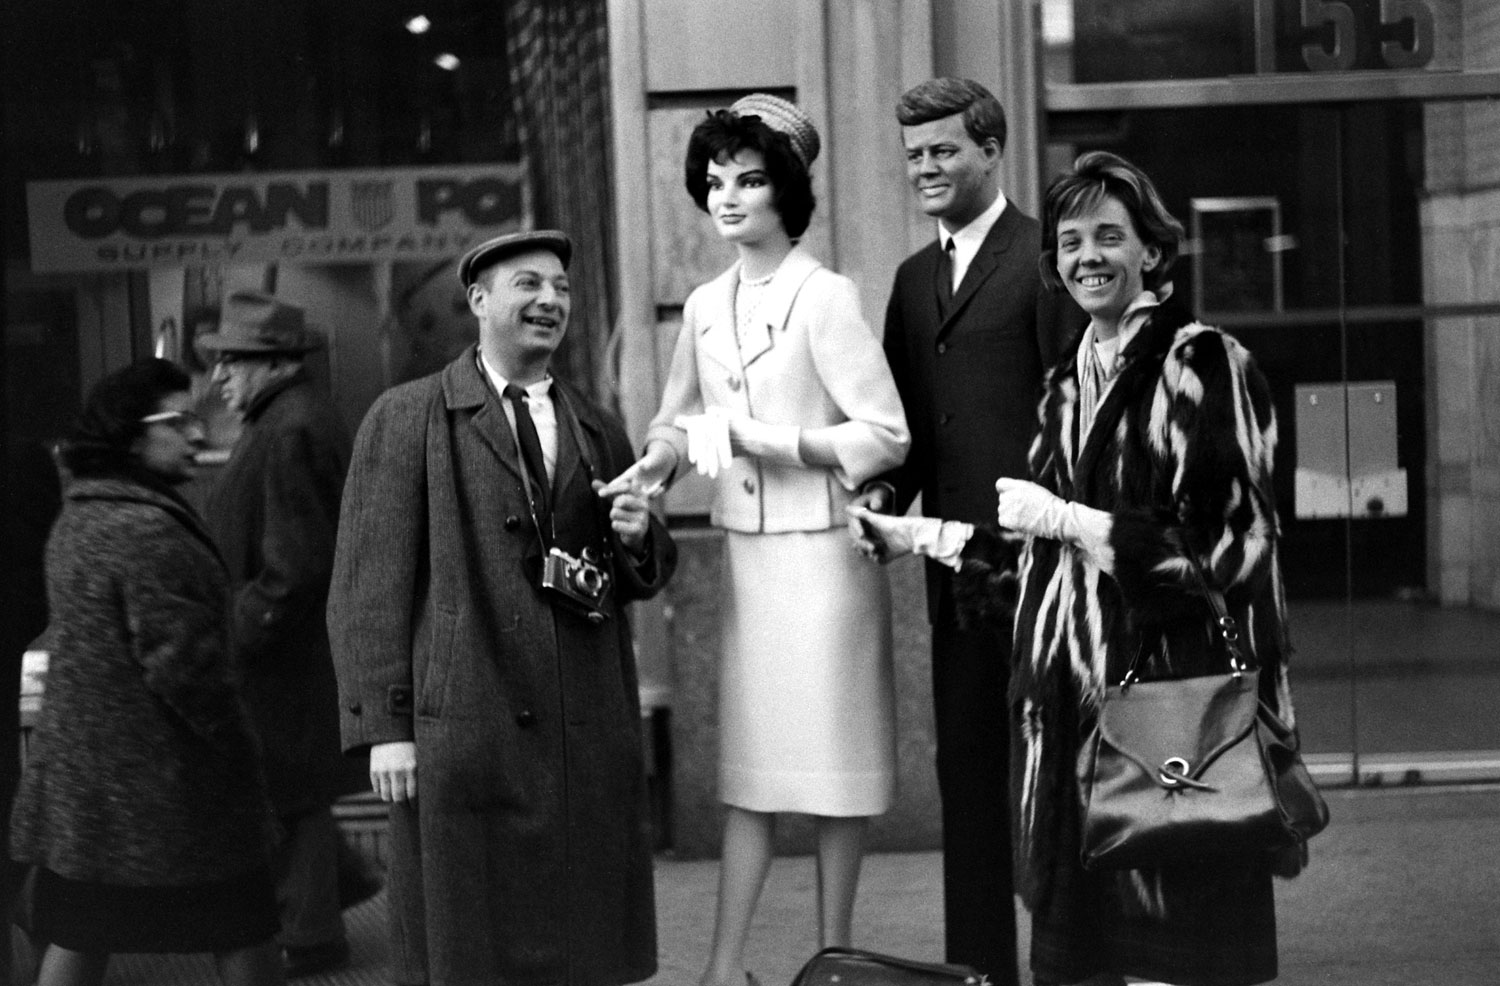 LIFE photographer Yale Joel and an unidentified woman pose with Jackie and JFK mannequins, 1961.